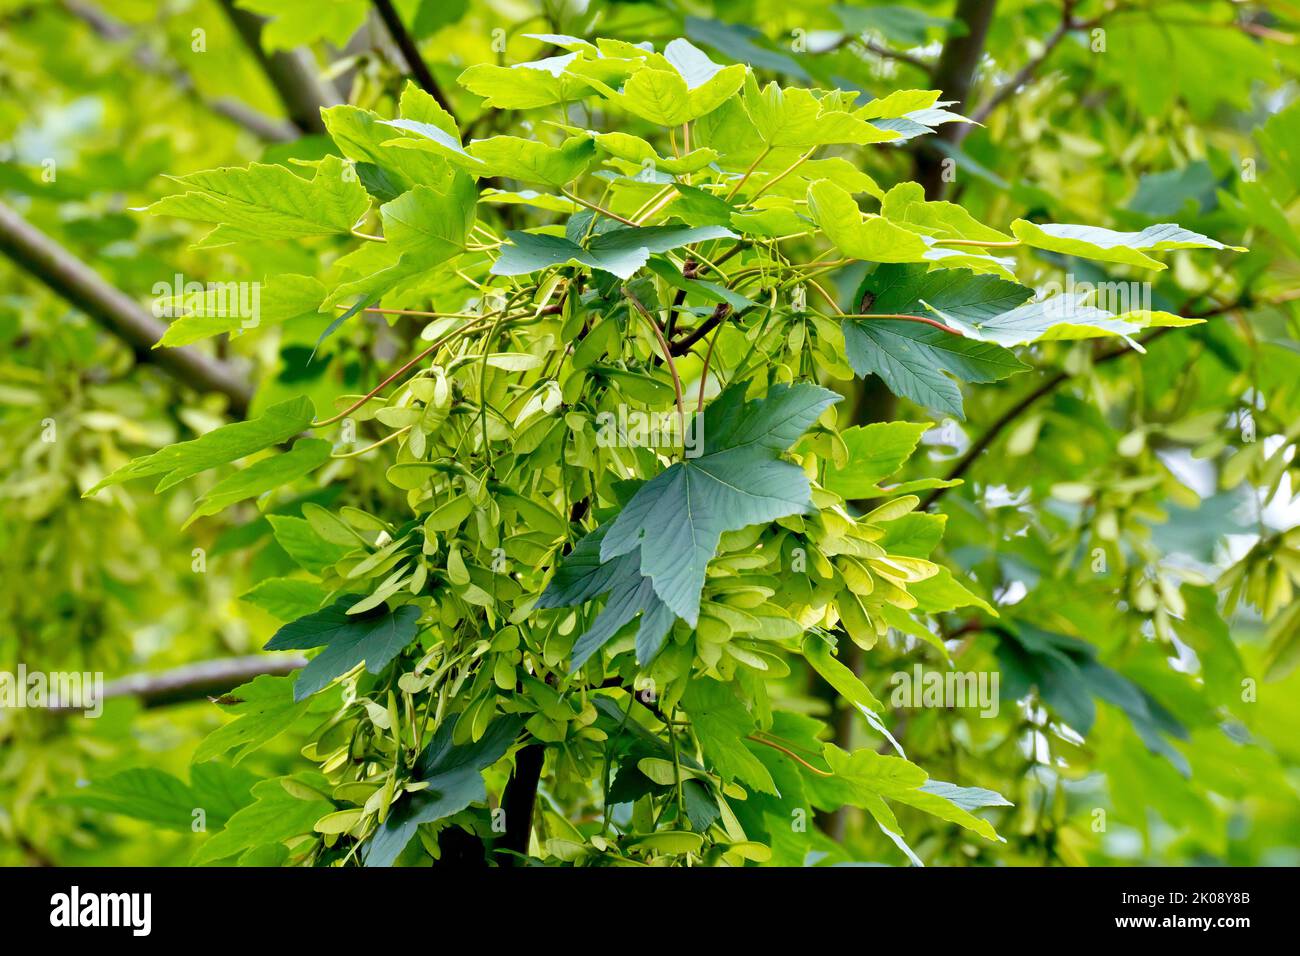 Sycamore (acer pseudoplatanus), close up showing a tree branch laden with the familiar but unripe winged seeds or fruits. Stock Photo